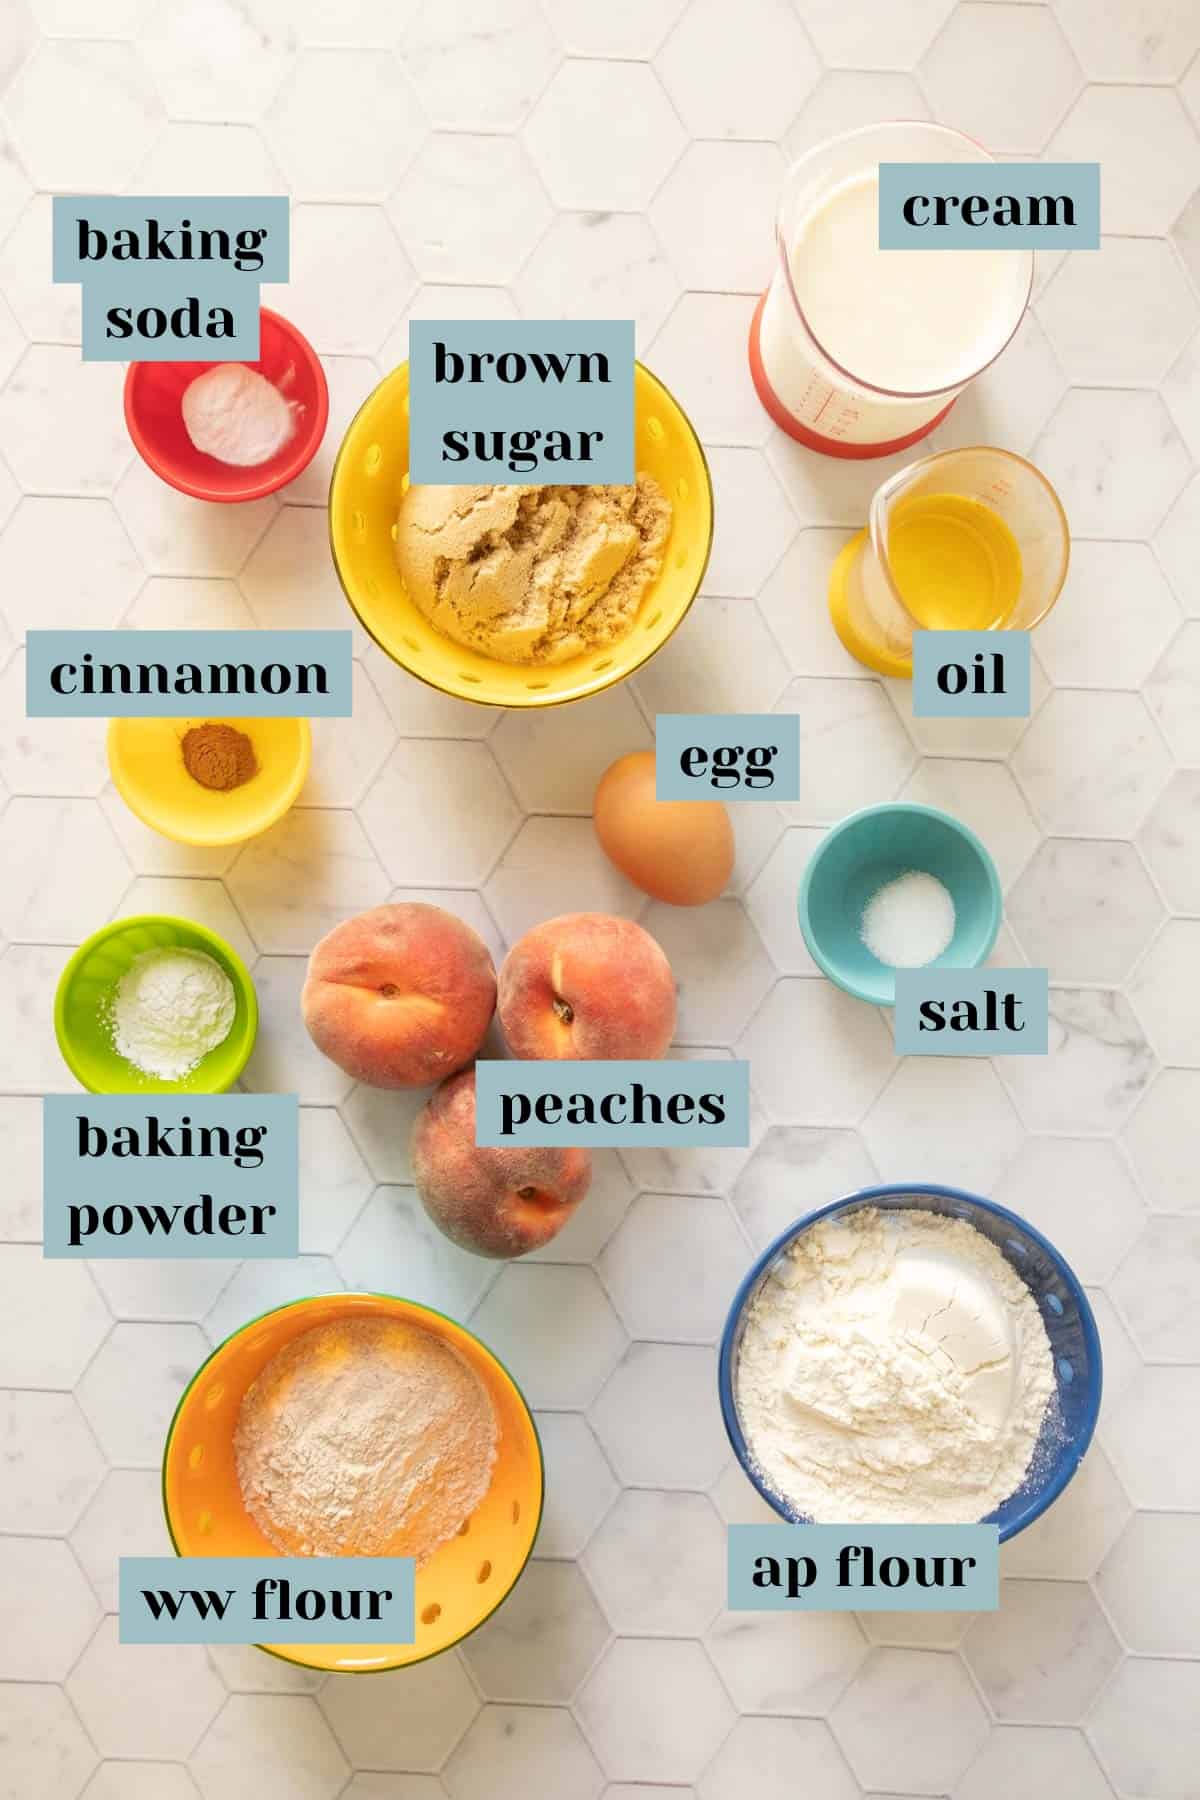 Ingredients for peach muffins on a tile surface with labels.